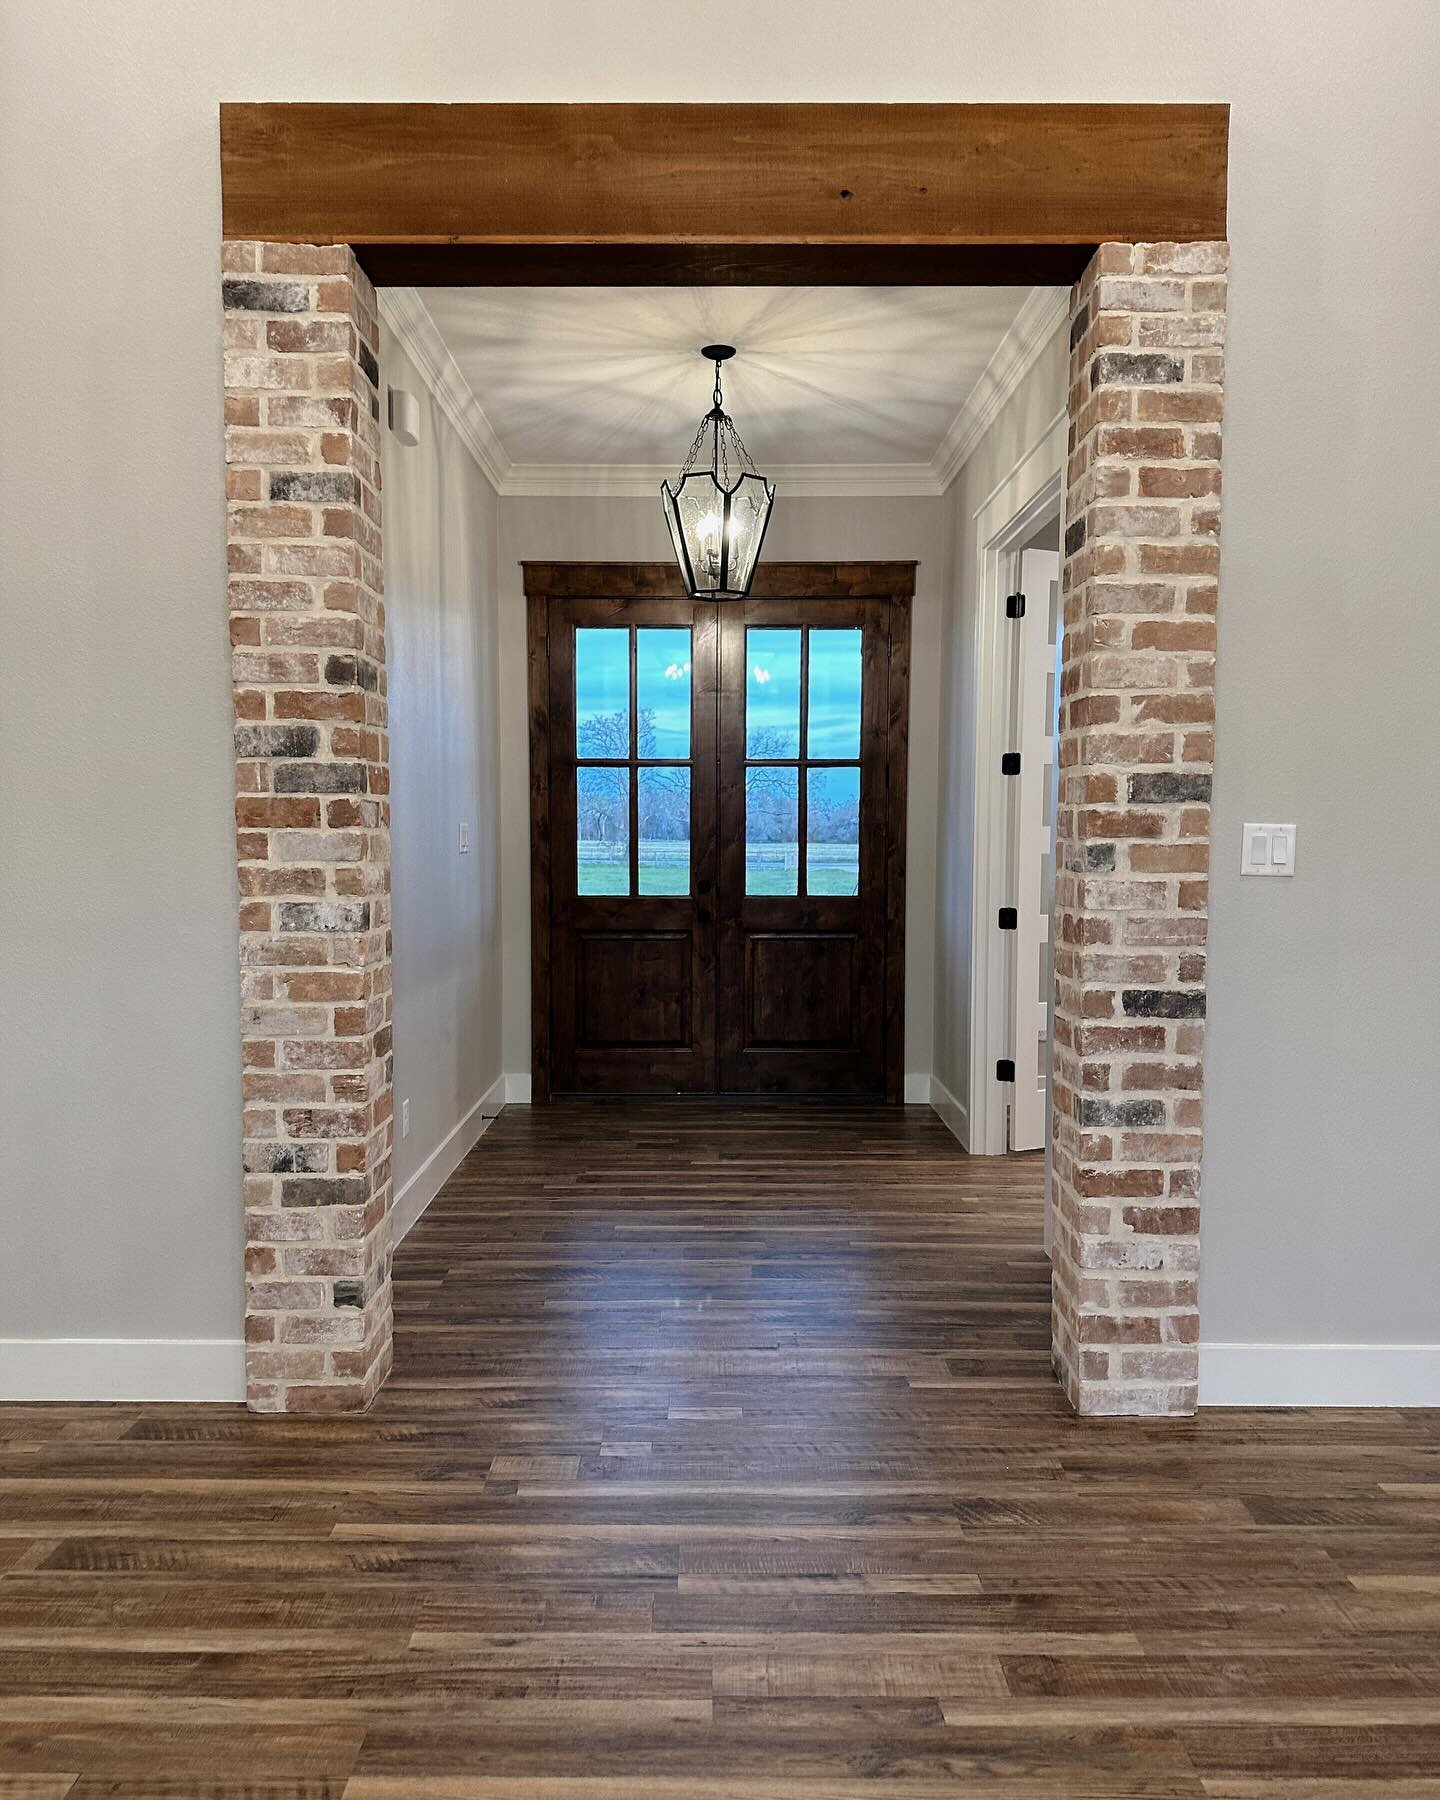 Step into our latest custom open-concept dream home featuring a stunning kitchen with a brick backsplash, a sleek butcher top island, and custom oak French doors. 🏡